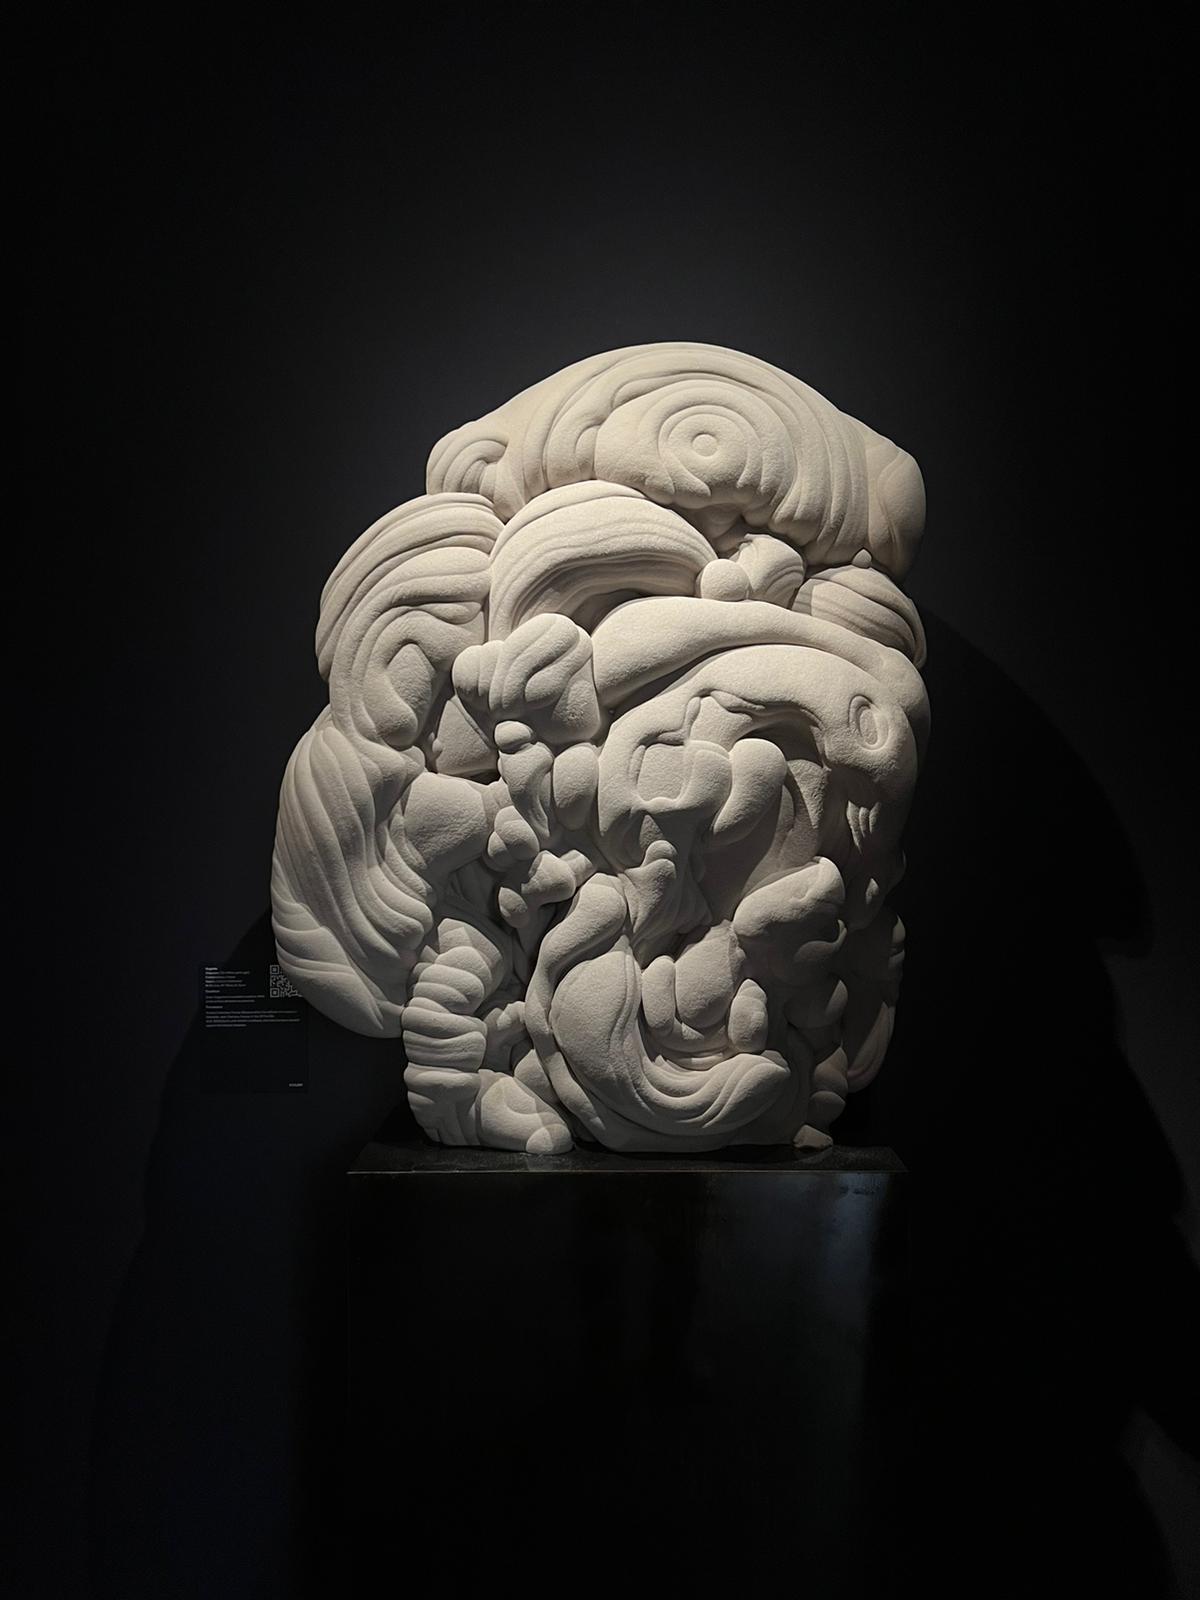 A rare Gogotte formation – a millions-of-years old naturally shaped sandstone concretion, consisting of tiny quartz fragments held together by calcium carbonate. The pale sandstone’s cloudlike naturally-occurring layers and swirls are formed when